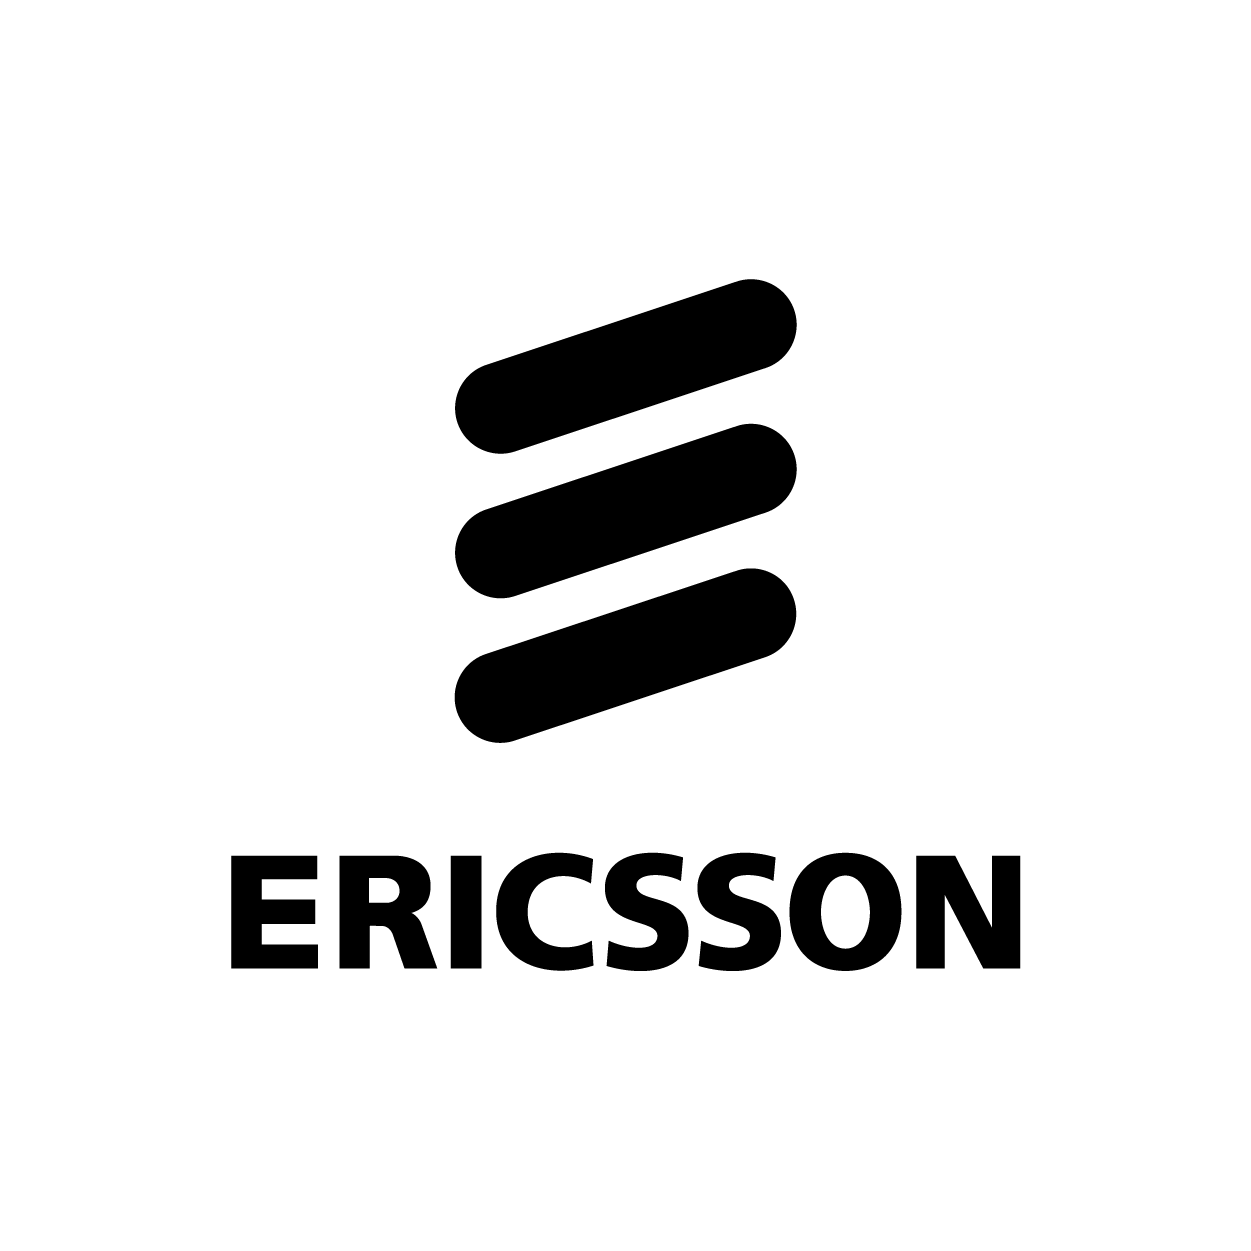 Why Ericsson Stock Is Gaining Today